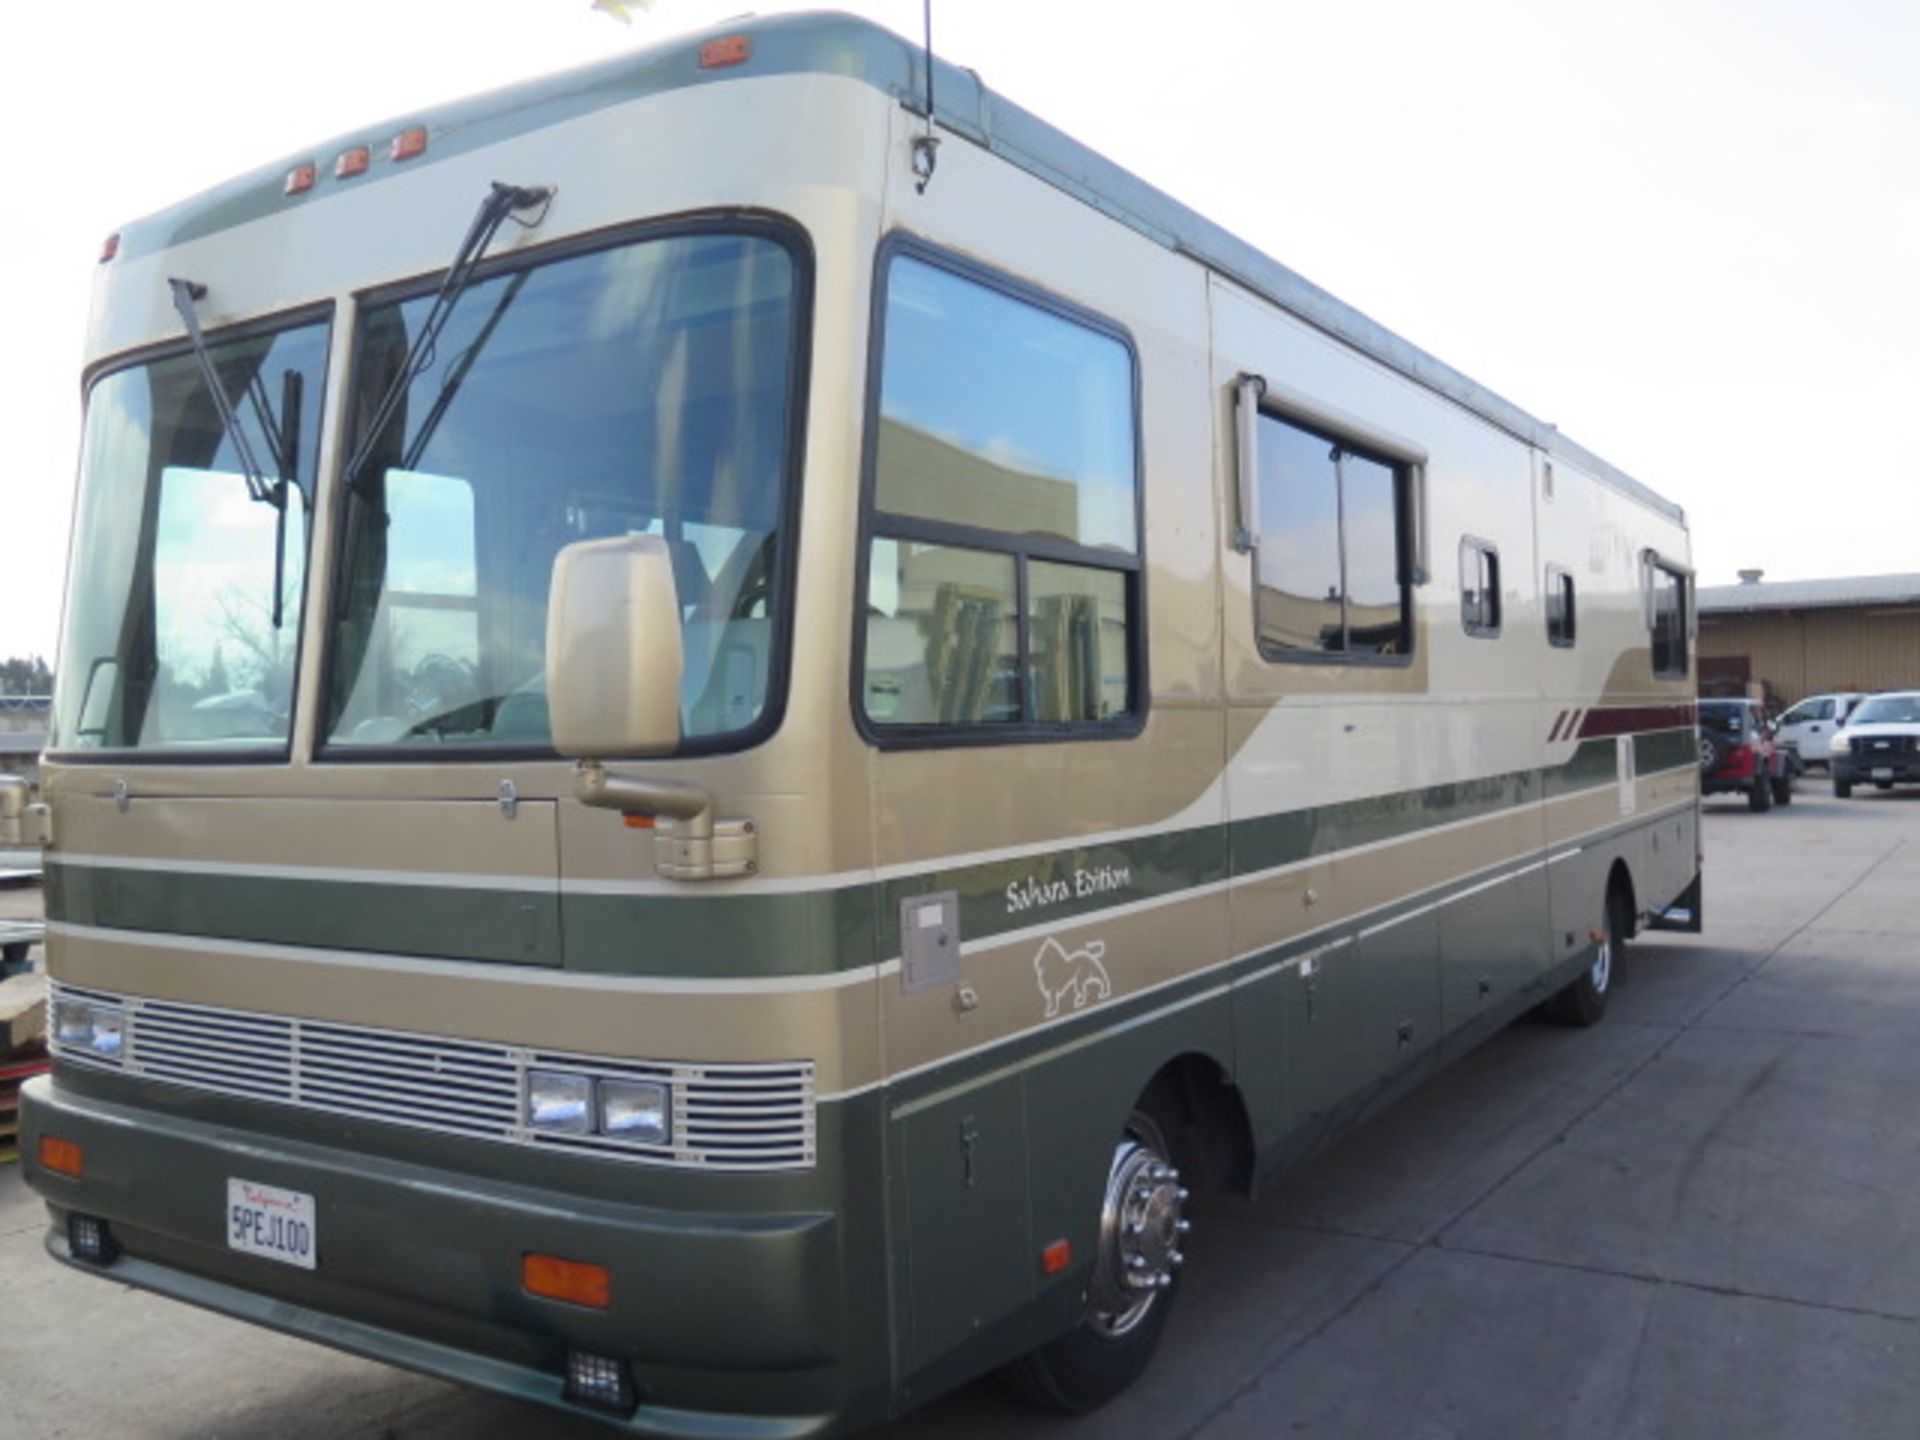 1997 Safari Motor Coacher Motor Home Lisc# 5PEJ100 w/ CAT Diesel Engine, Automatic Trans, SOLD AS IS - Image 3 of 54